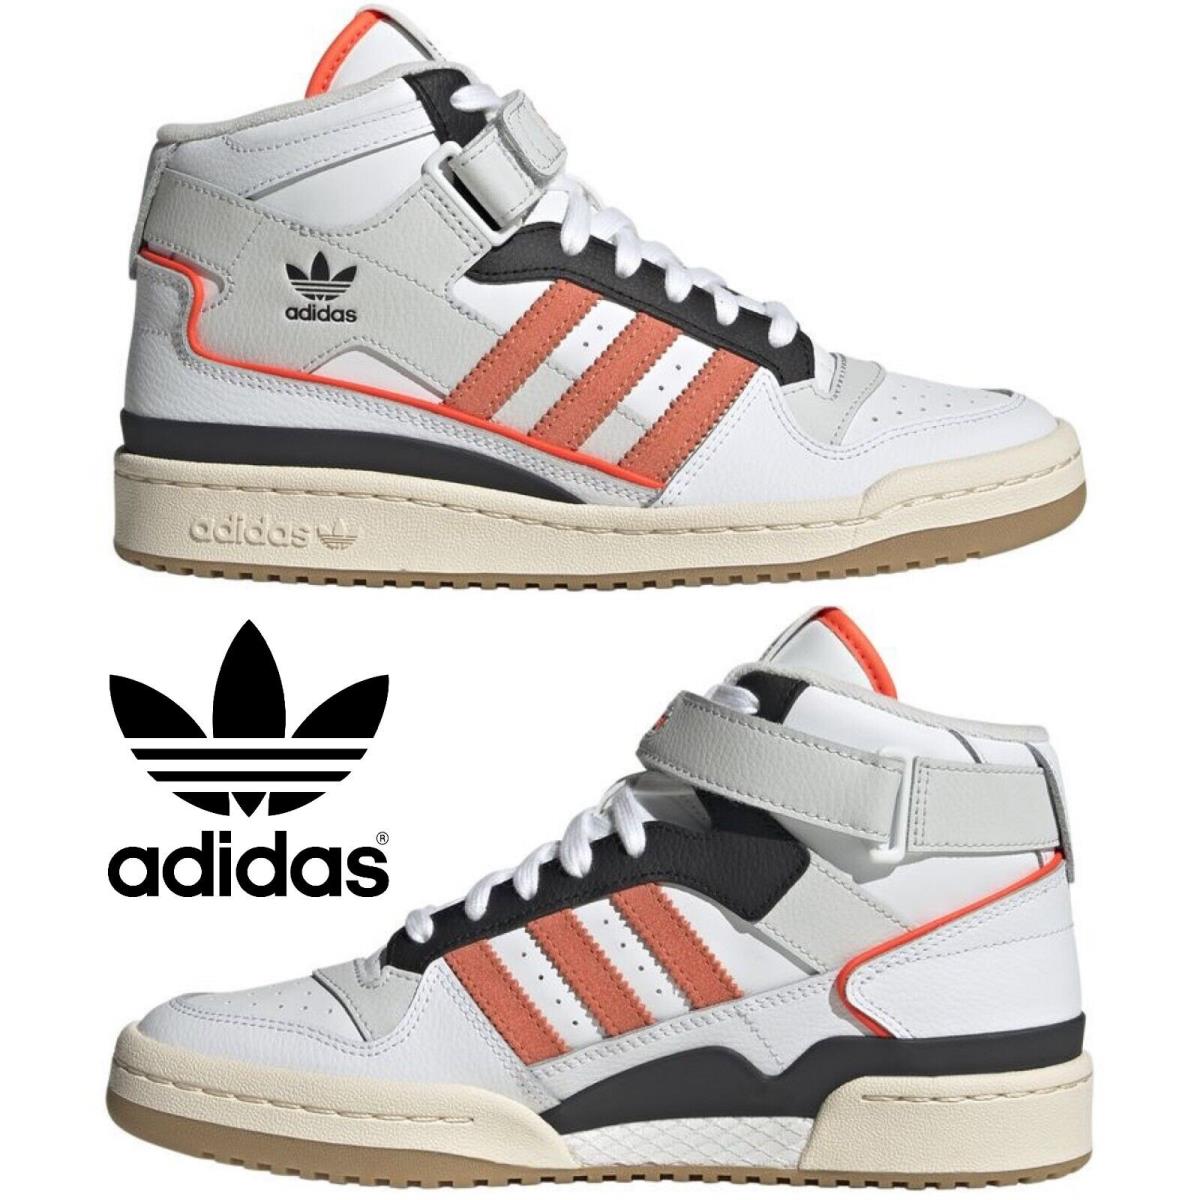 Adidas Originals Forum Mid Shoes Women`s Sneakers Comfort Casual White Red - White , Ftwr White/Semi Coral Fusion/Solar Red Manufacturer